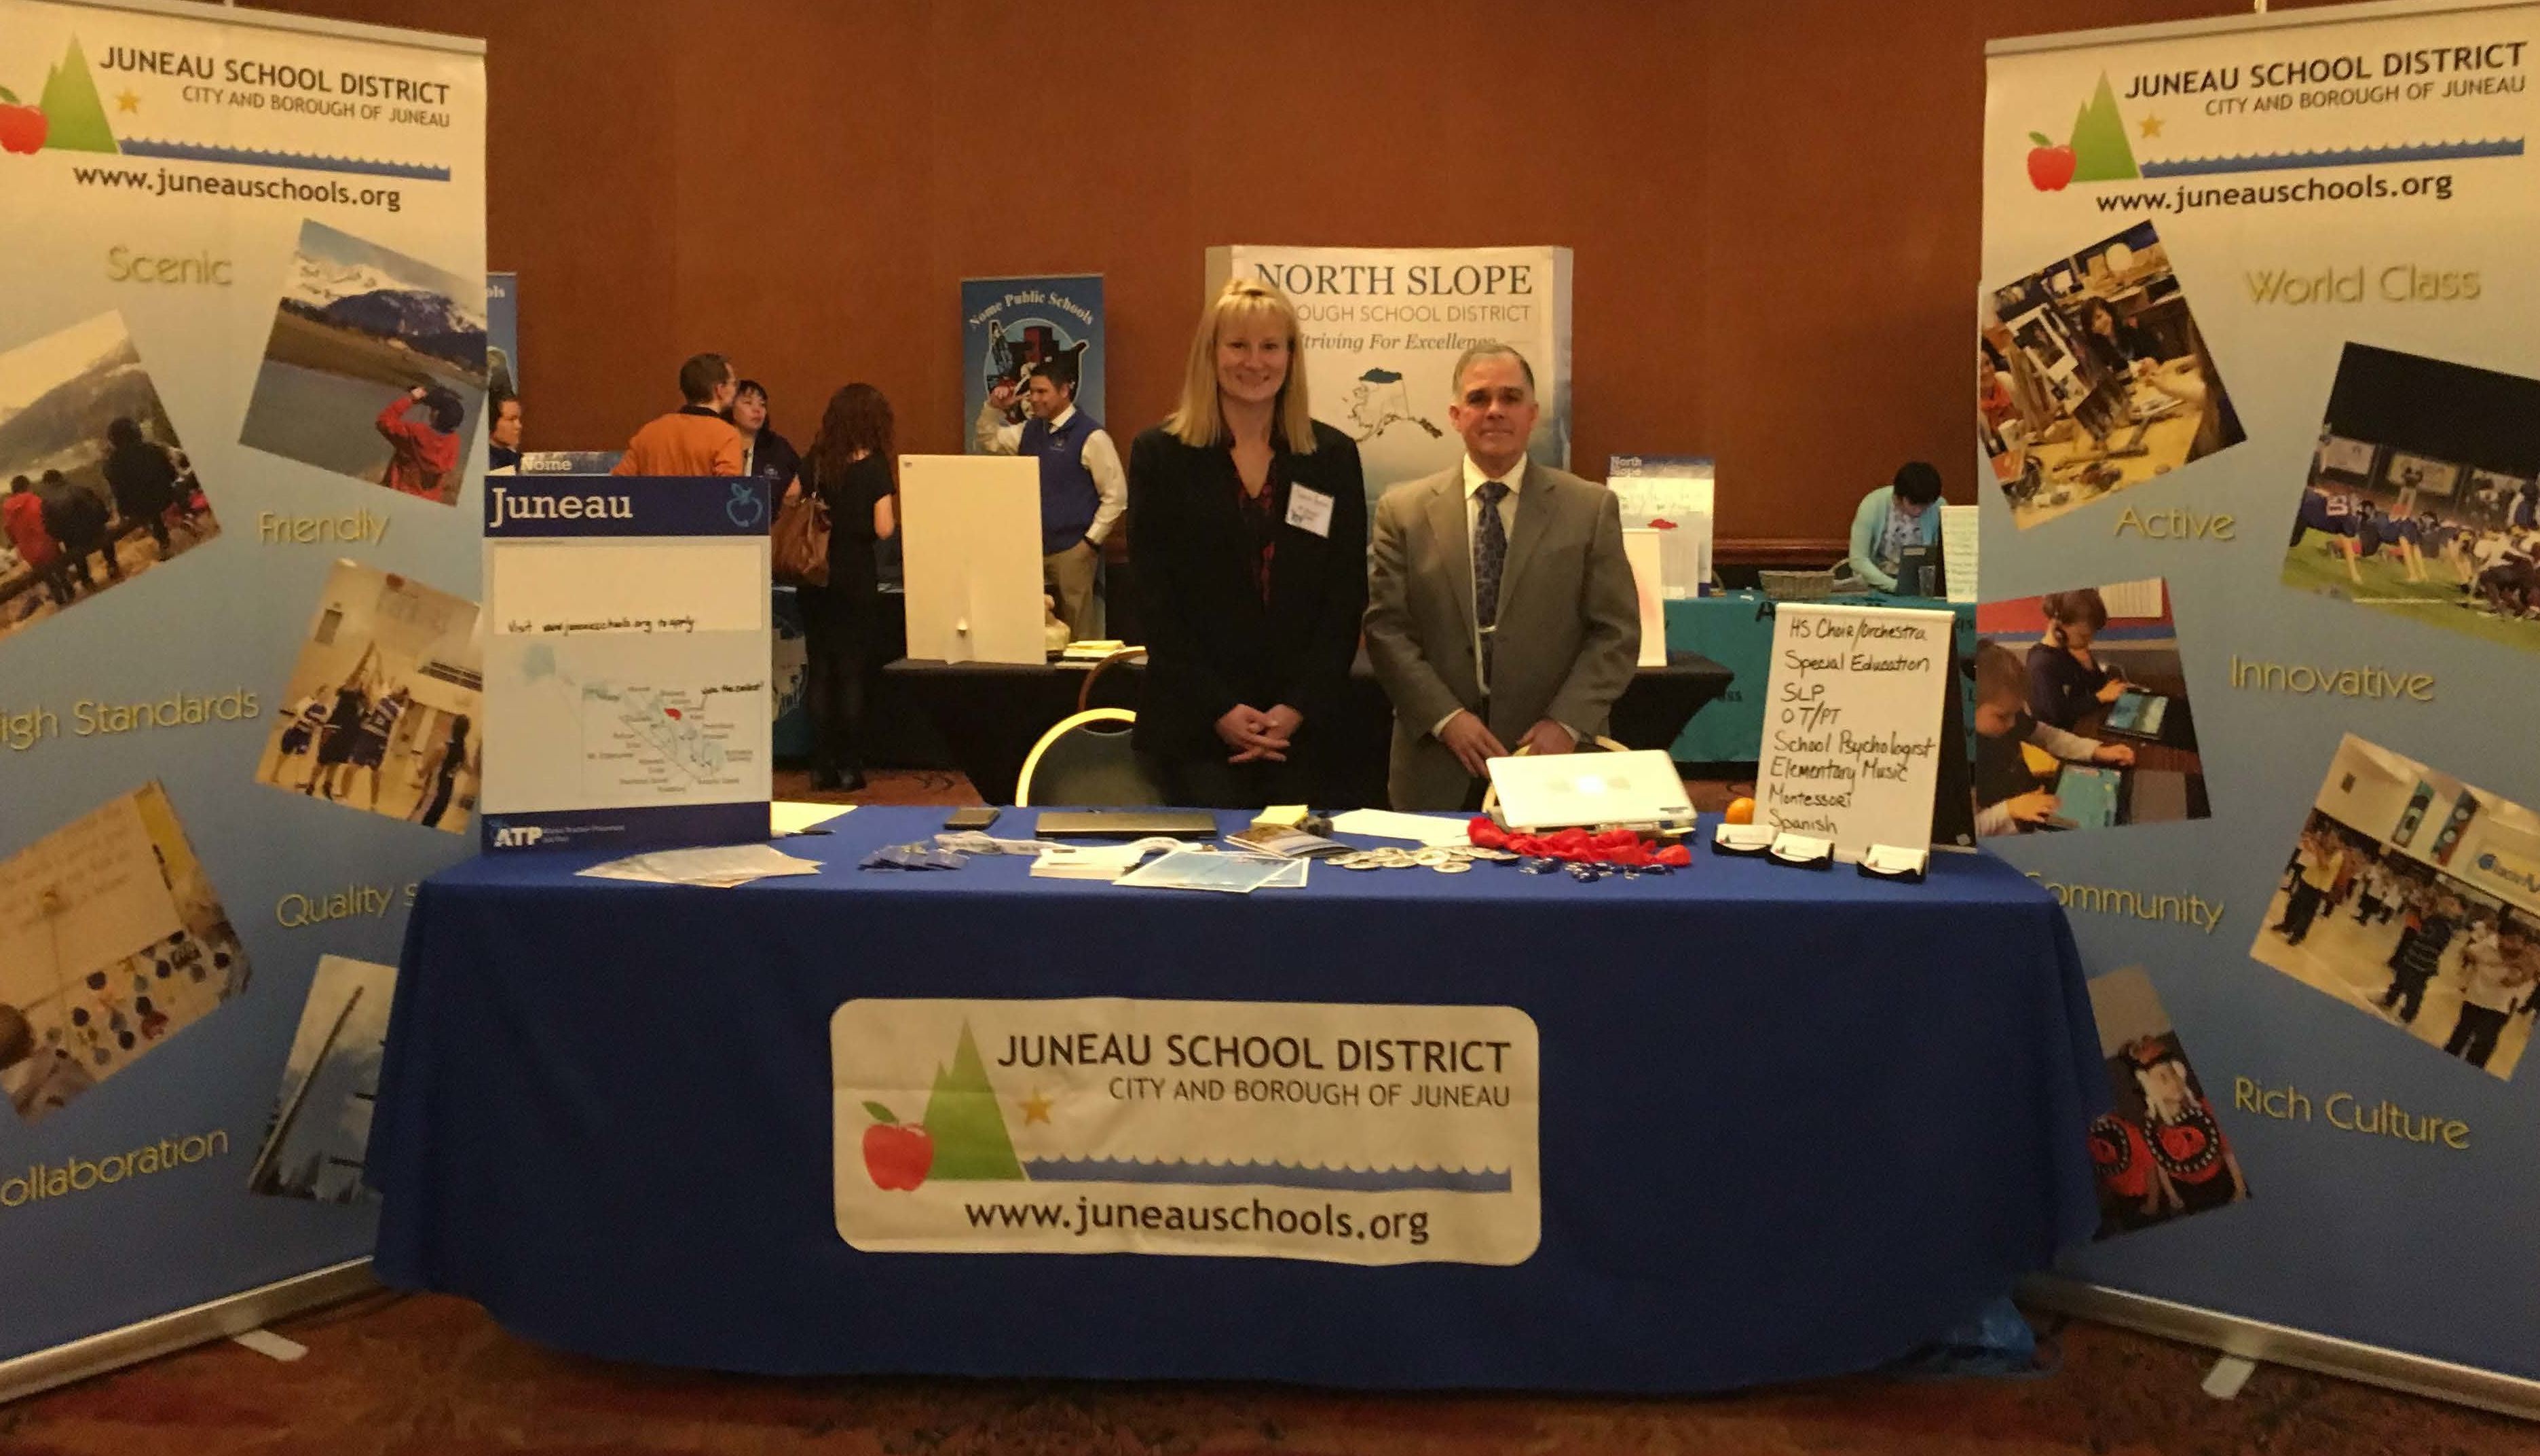 Juneau School District Human Resources Manager Cherish Hansen left, and recently retired Human Resources Director Ted VanBronkhorst at the Alaska Teacher Placement Job Fair in Anchorage, March 2017.